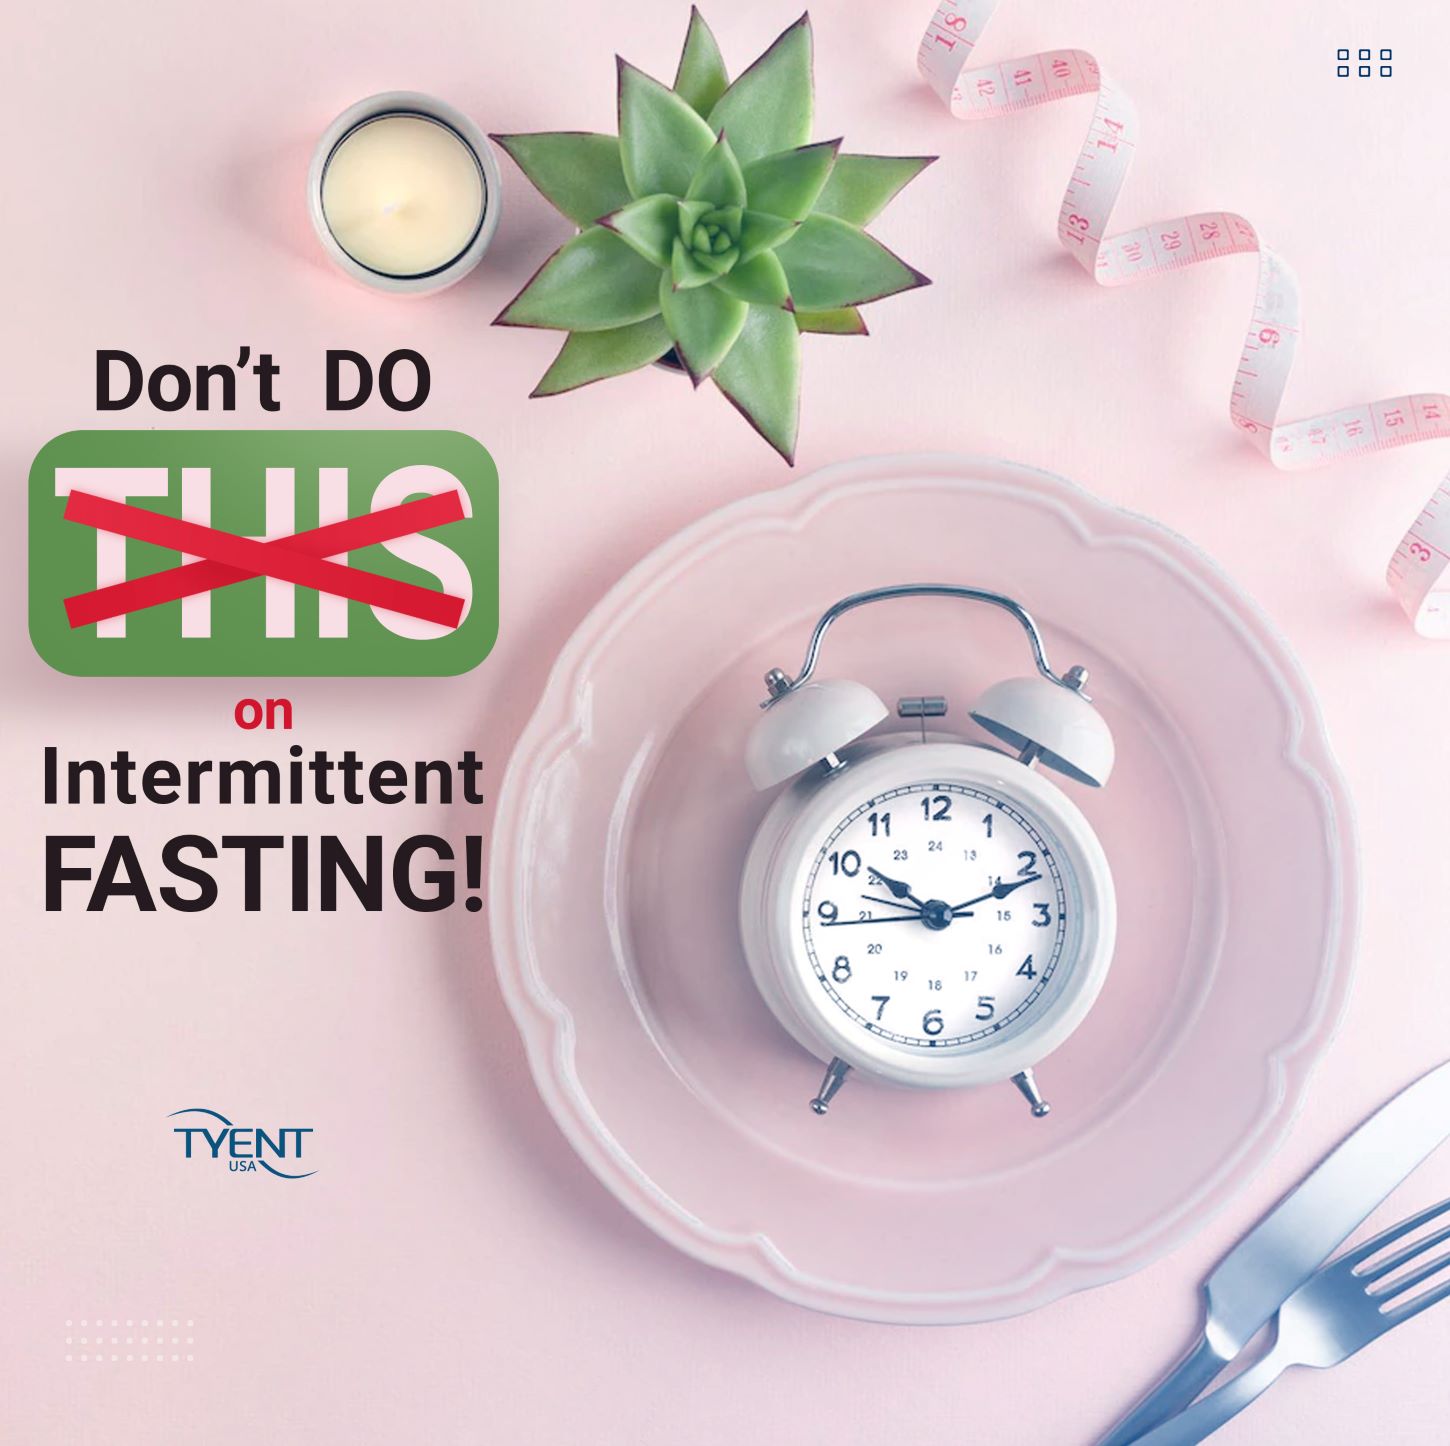 DON’T Do This on Intermittent Fasting!